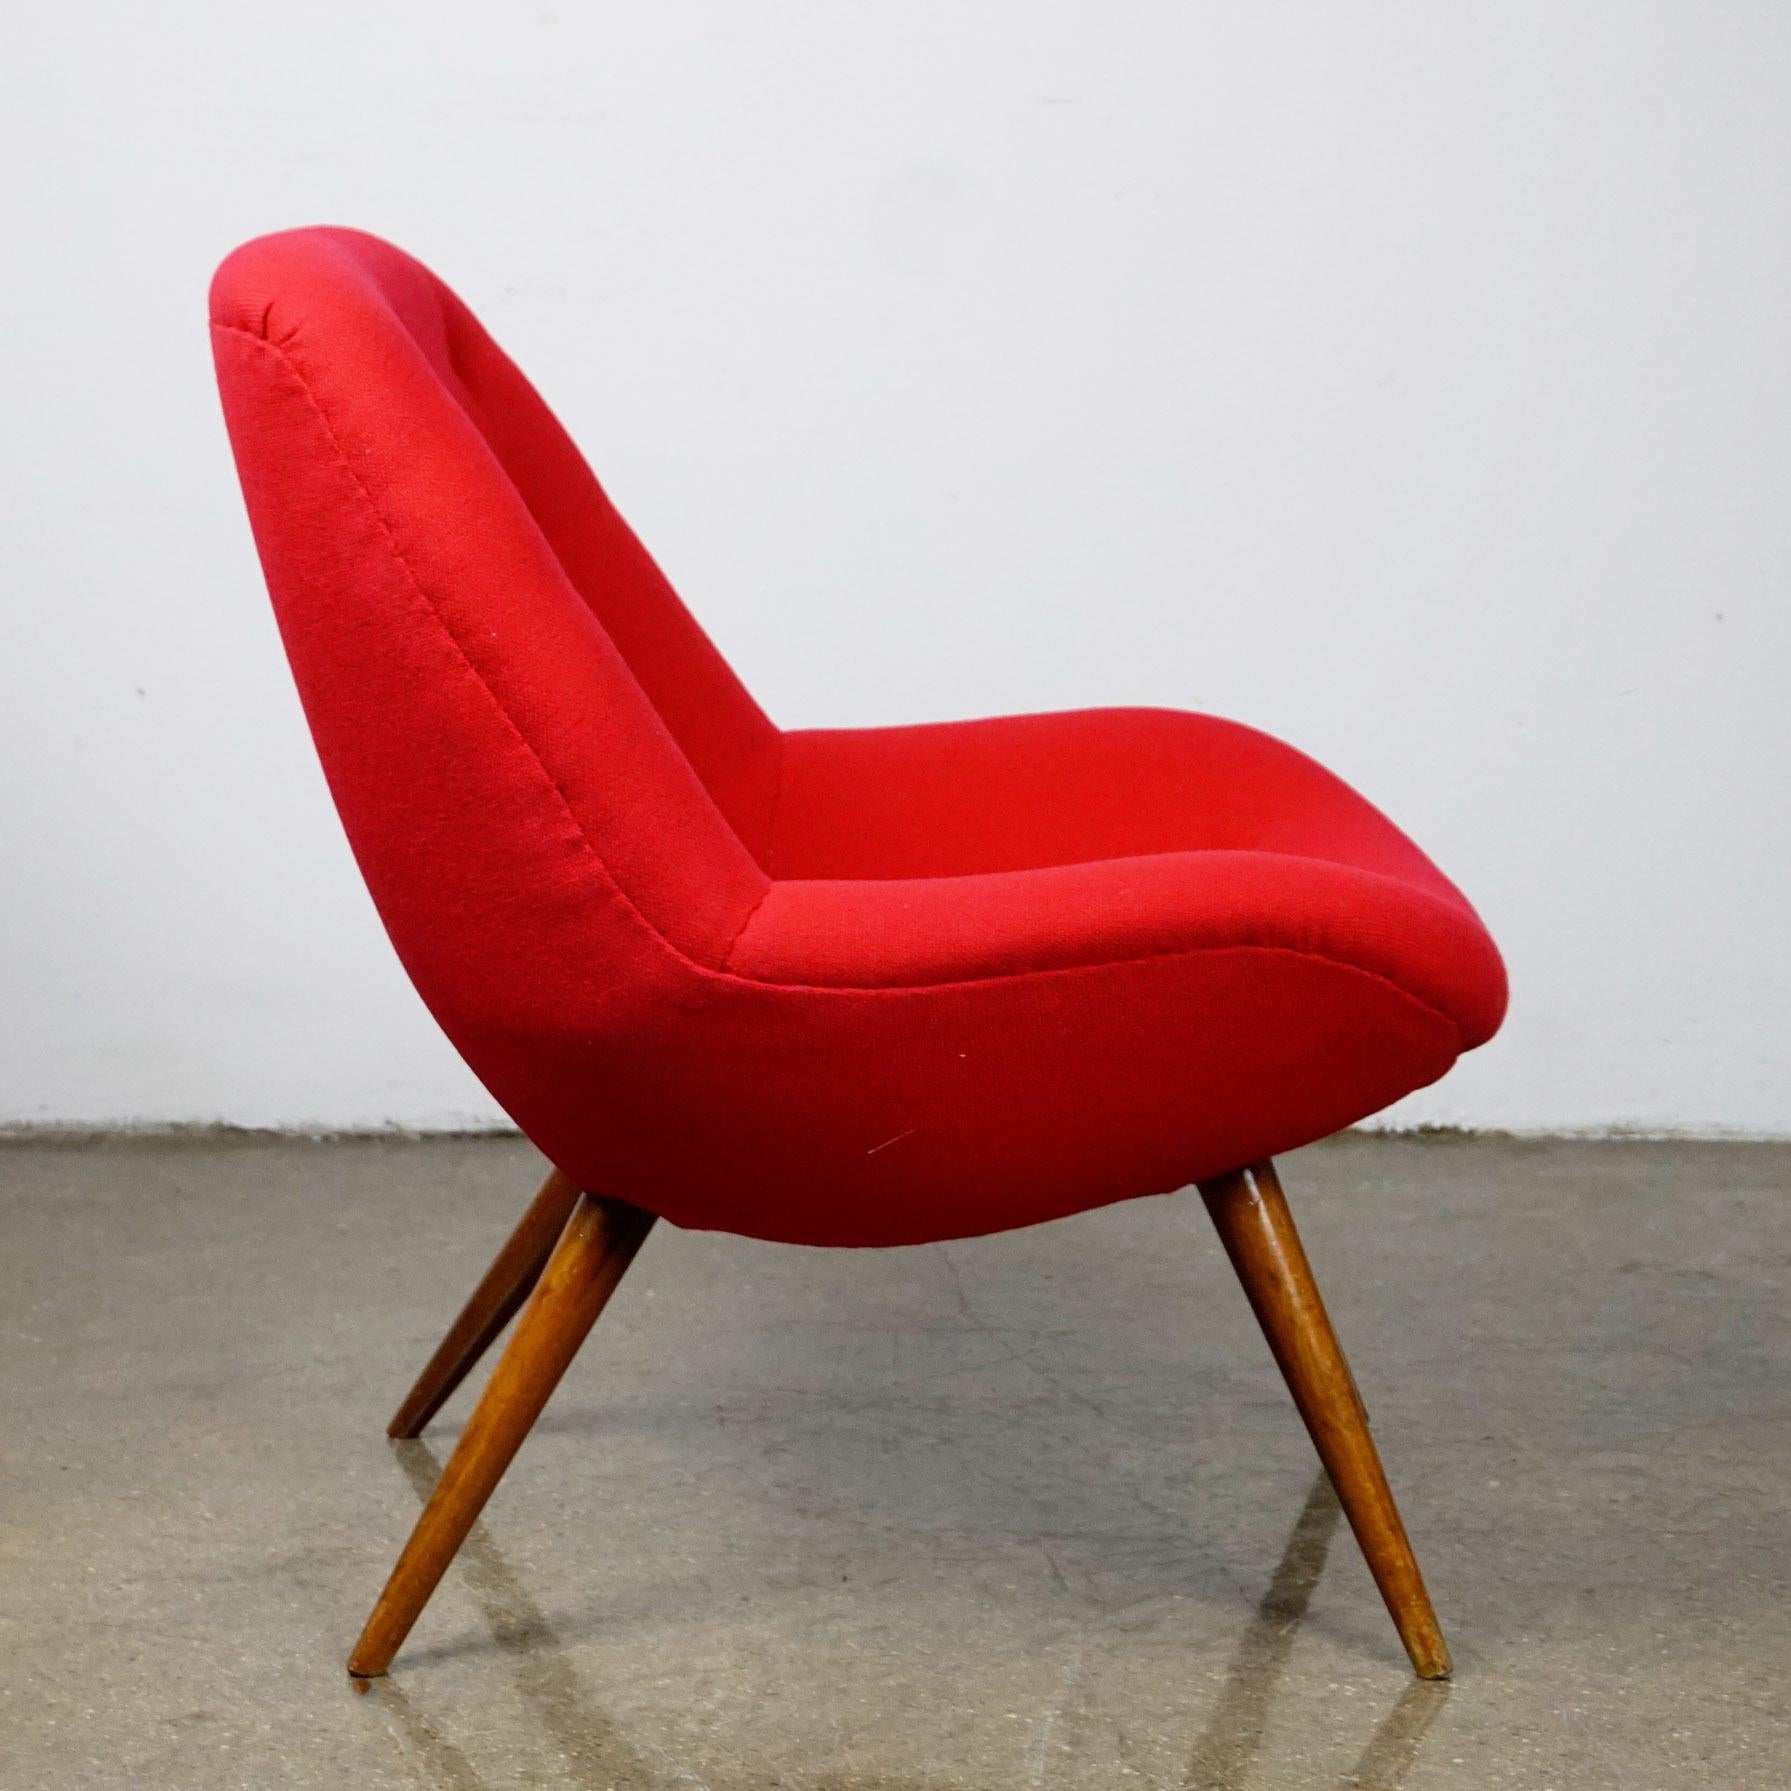 Mid-20th Century Austrian Midcentury Red Bucket Lounge or Cocktail Chair with Walnut Legs